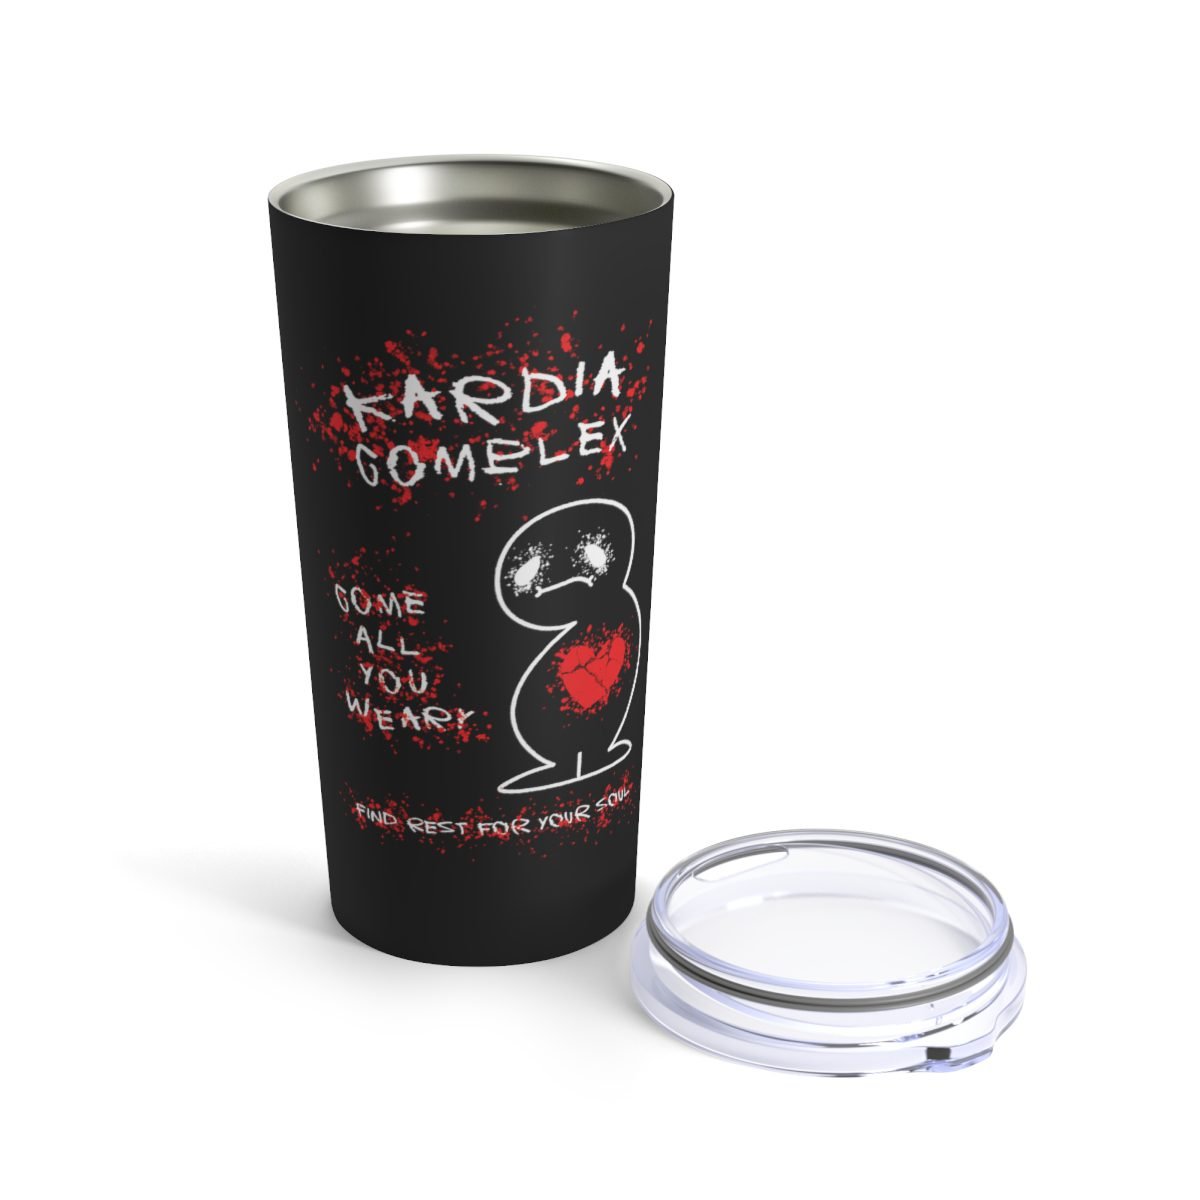 Kardia Complex – Come All You Weary 20oz Stainless Steel Tumbler